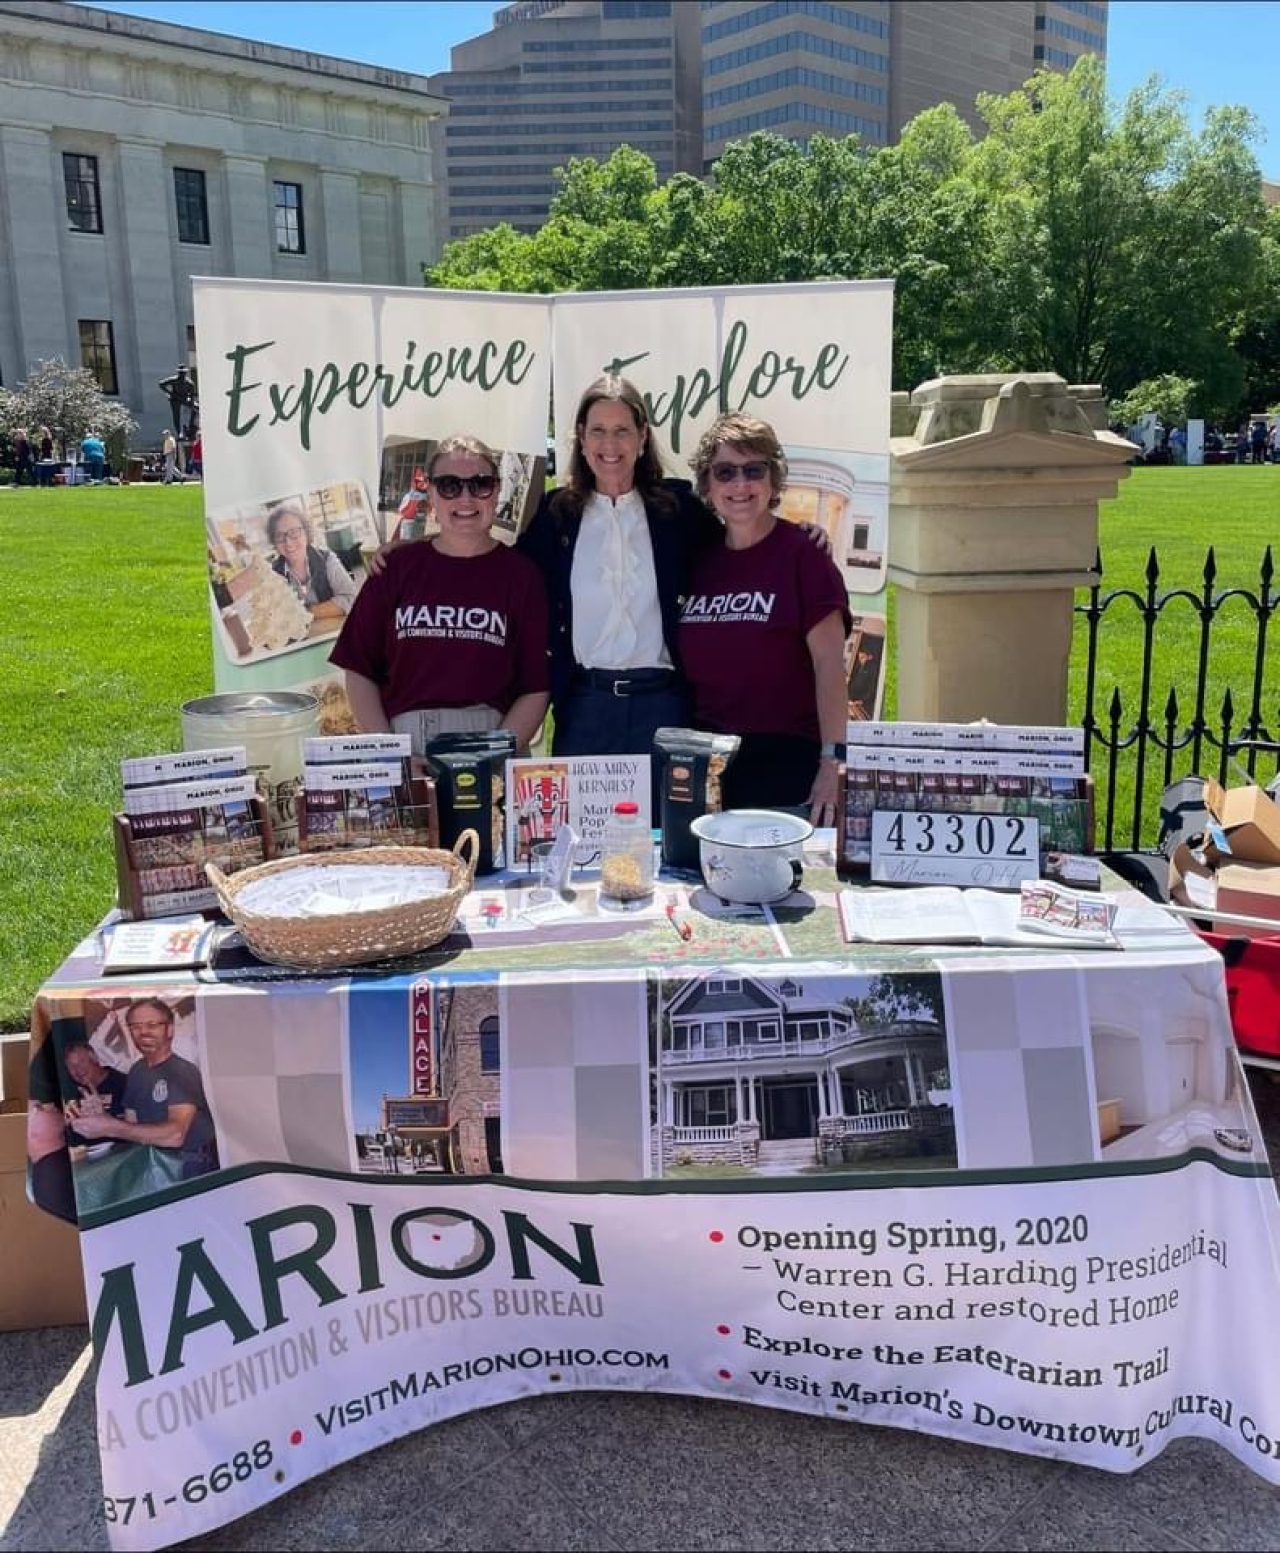 Representative Richardson joined the Marion Area Convention and Visitors Bureau for Ohio Tourism Day at the Ohio Statehouse.